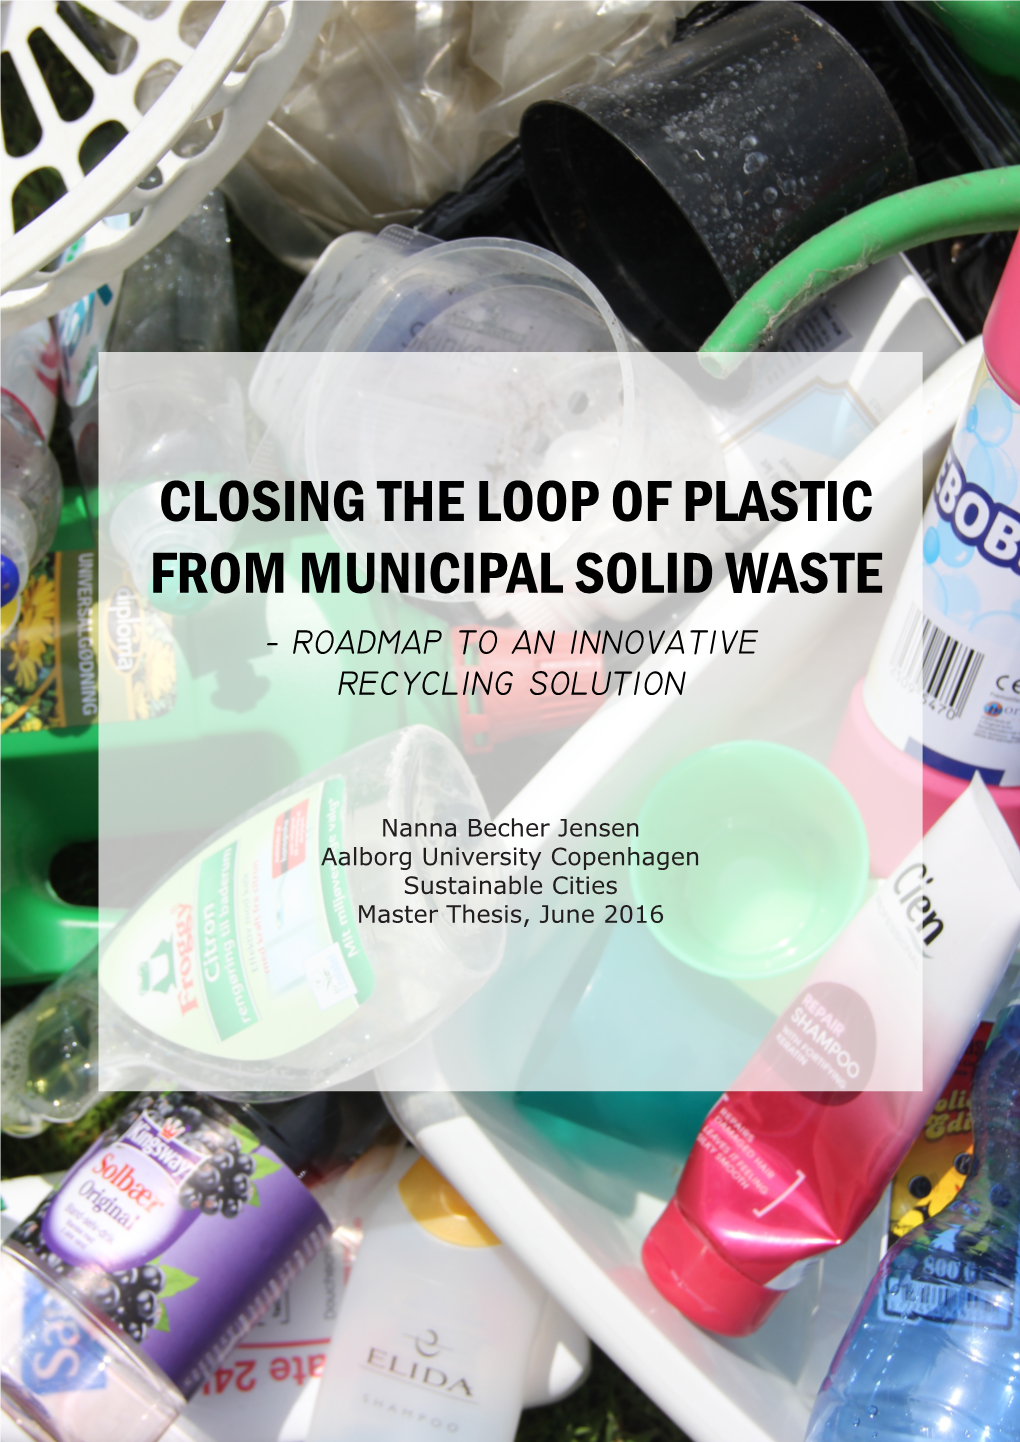 Closing the Loop of Plastic from Municipal Solid Waste - Roadmap to an Innovative Recycling Solution